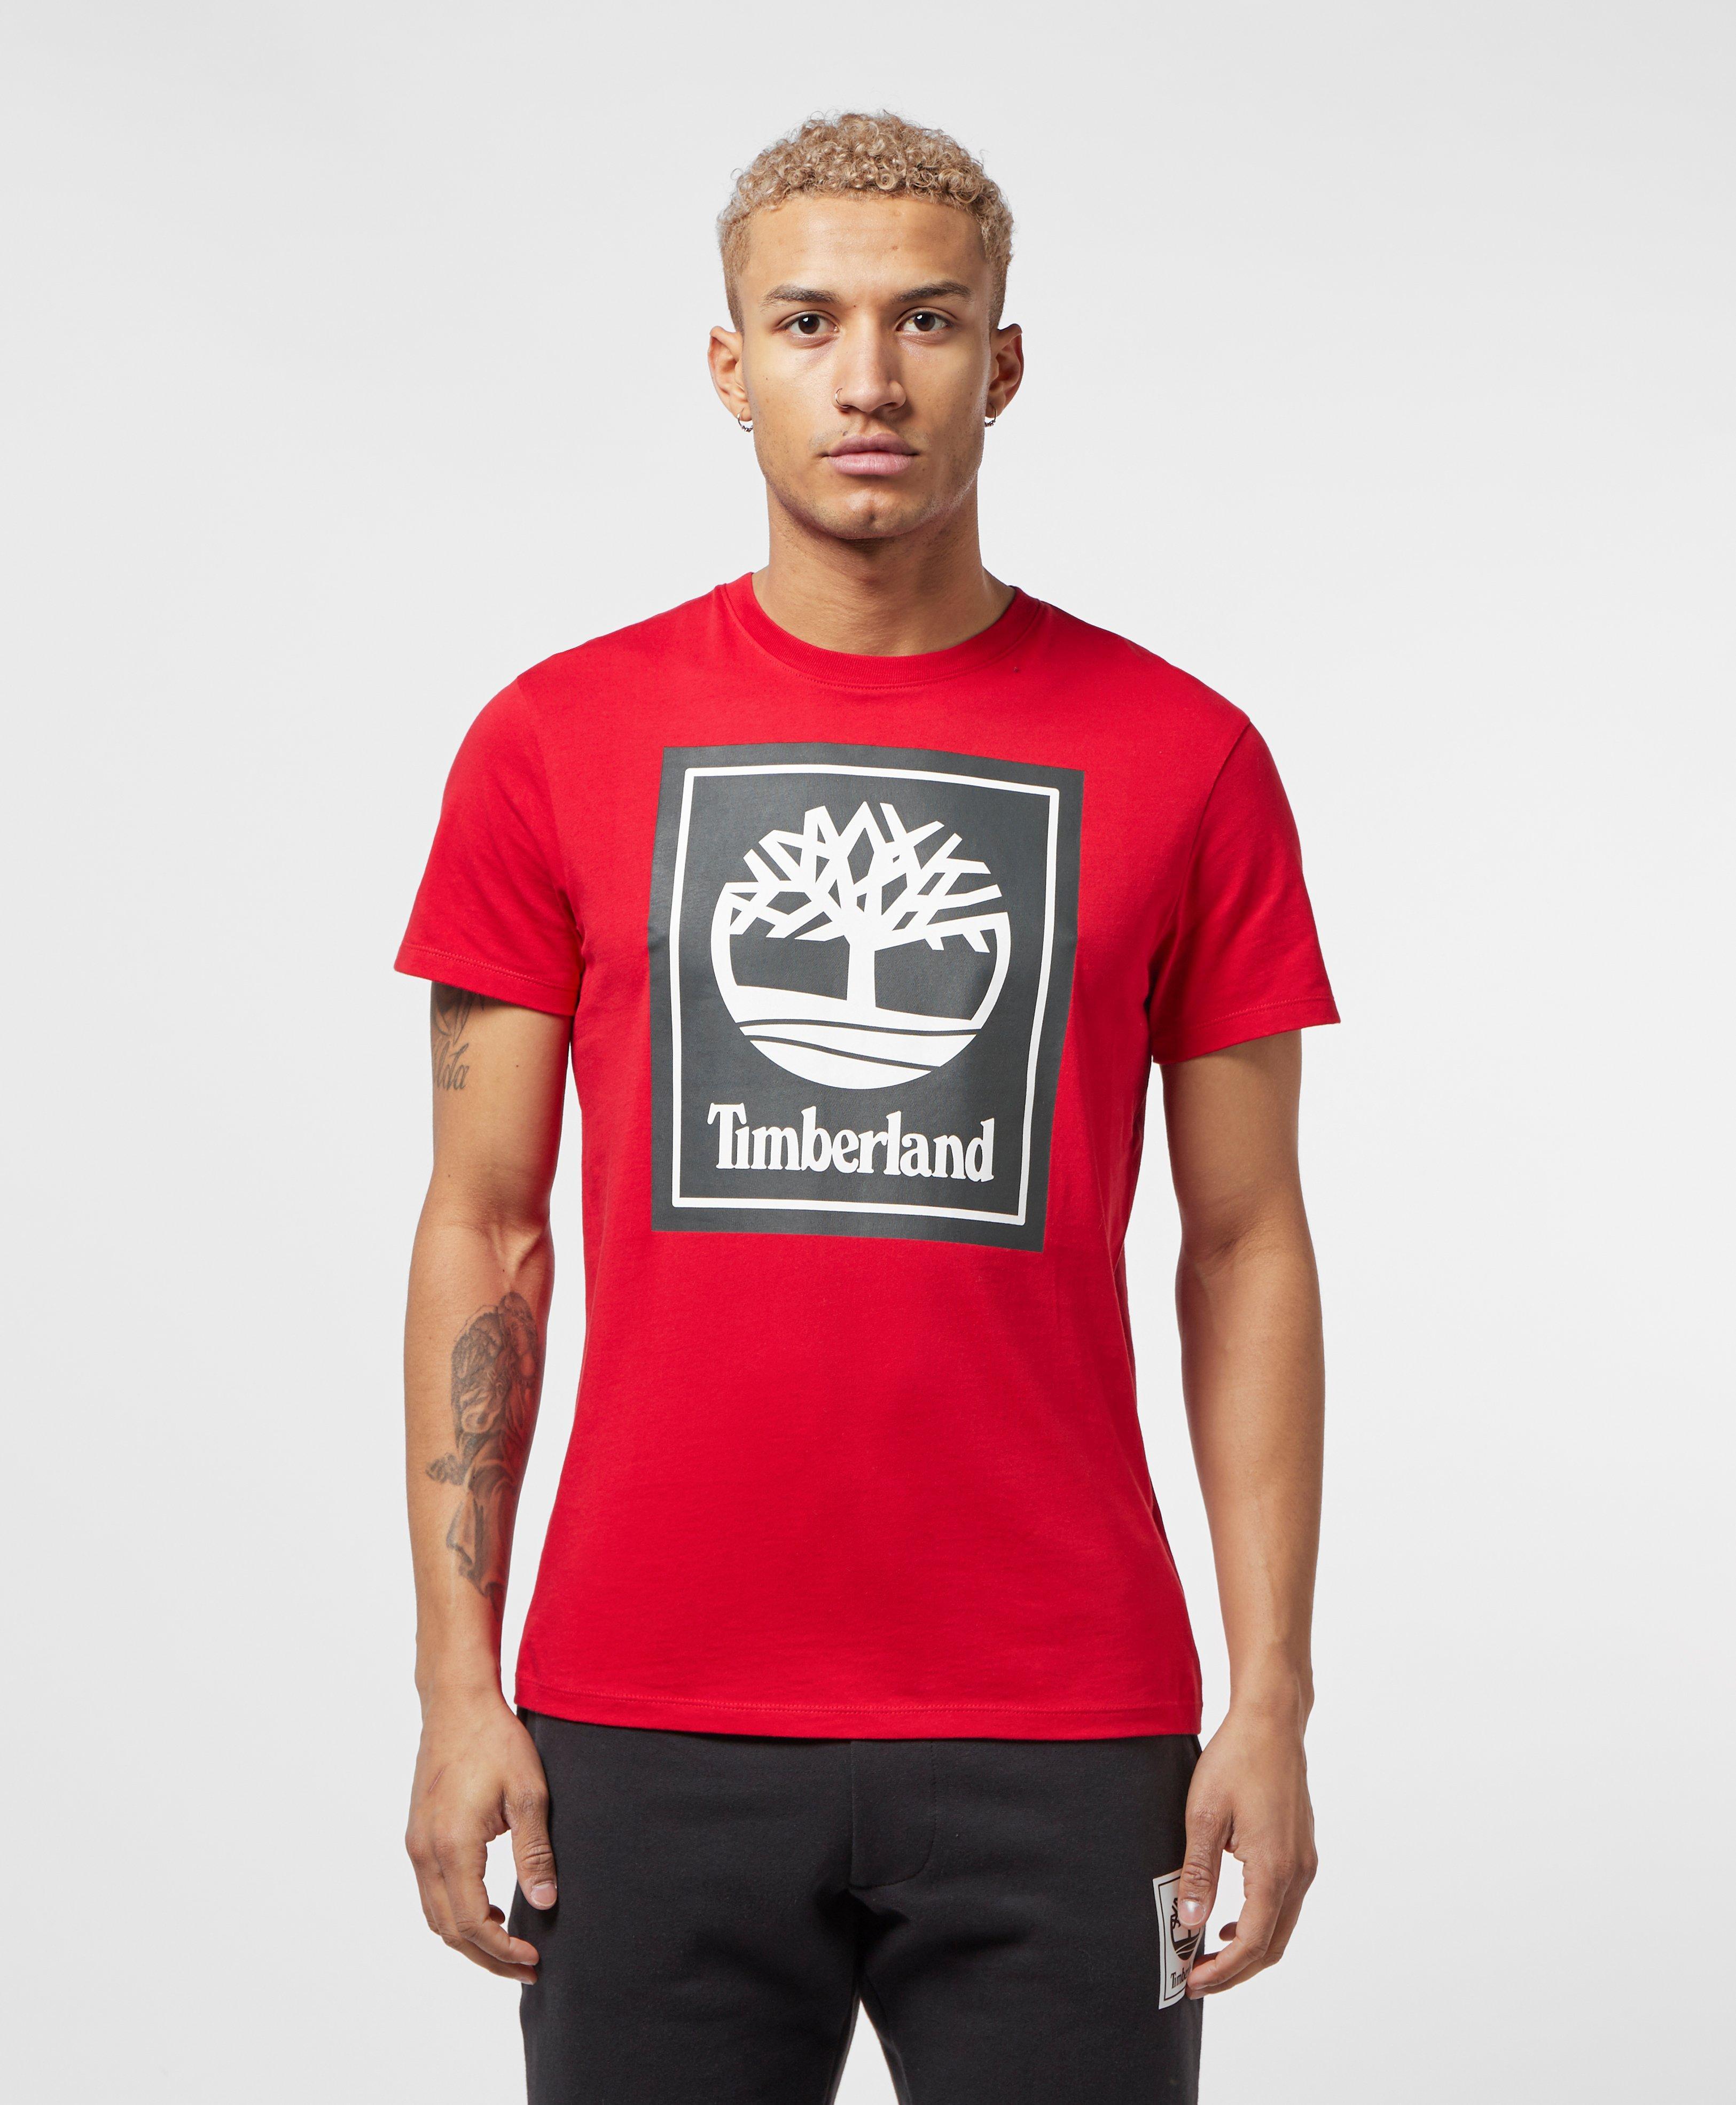 Timberland Cotton Big Tree Short Sleeve T-shirt in Red for Men - Lyst